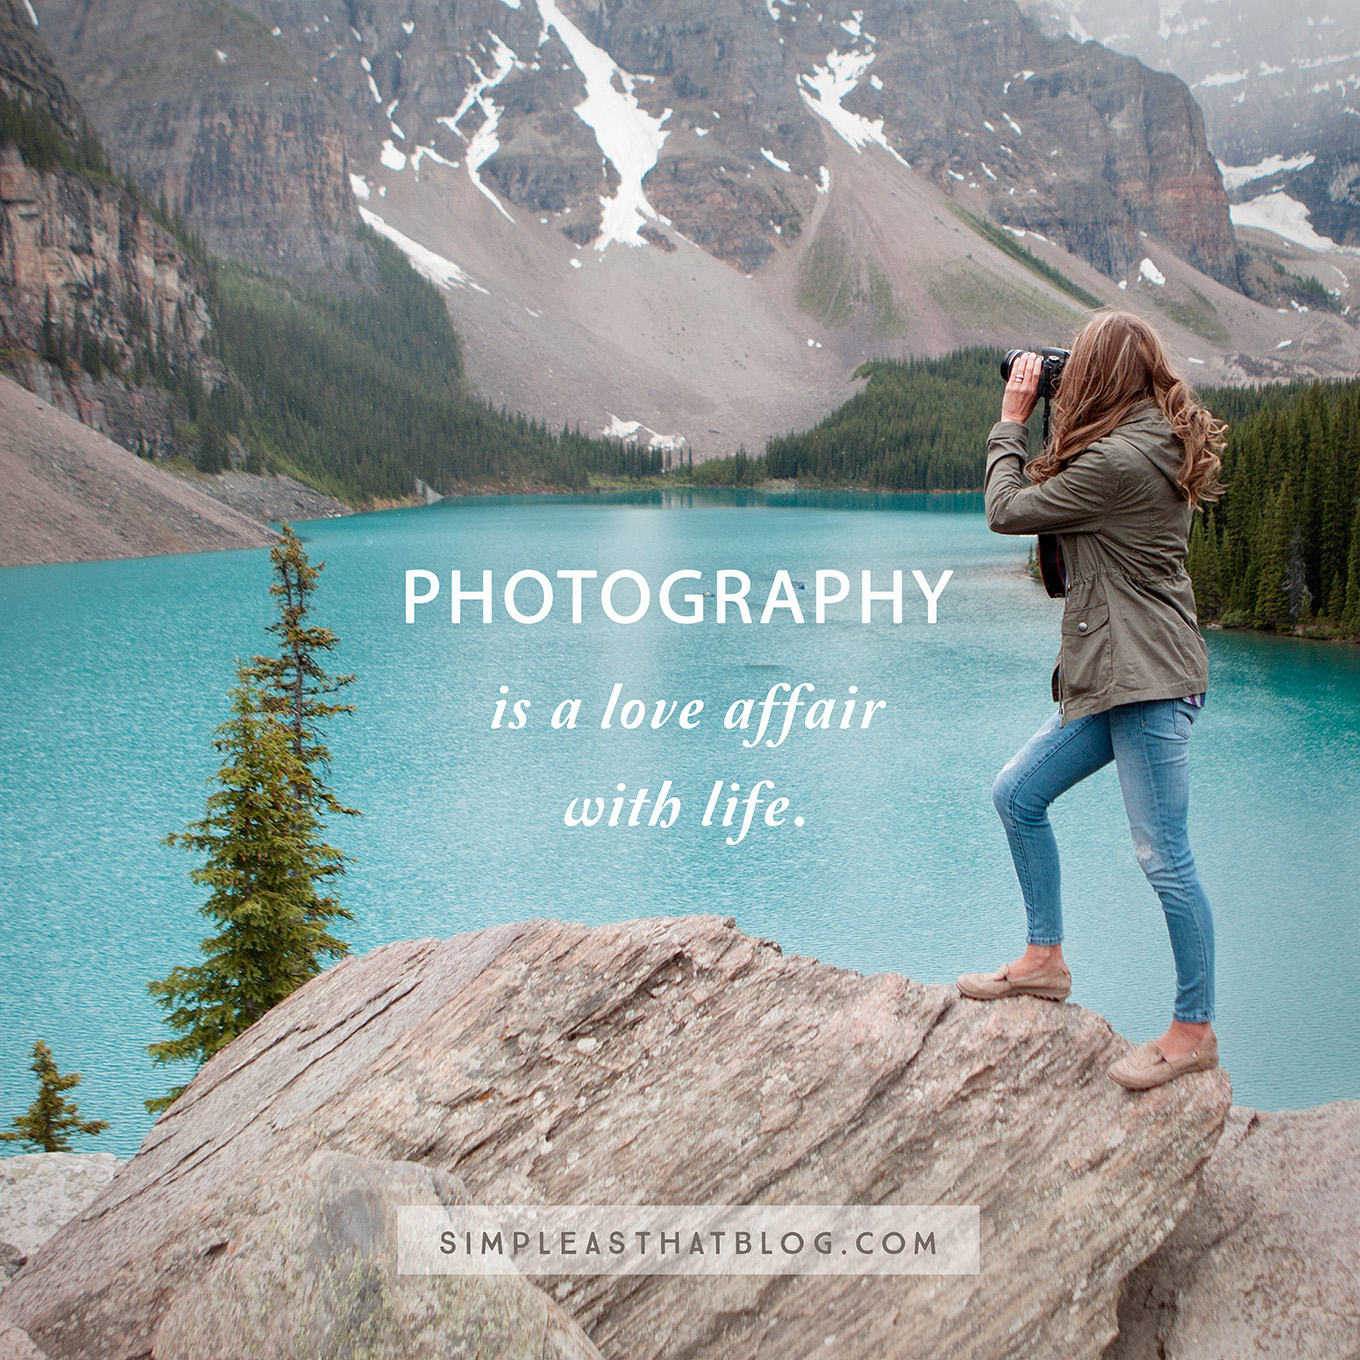 Whether you want to connect with like-minded women or to launch a professional photography business—5 simple steps to starting a photography blog you'll be proud of!